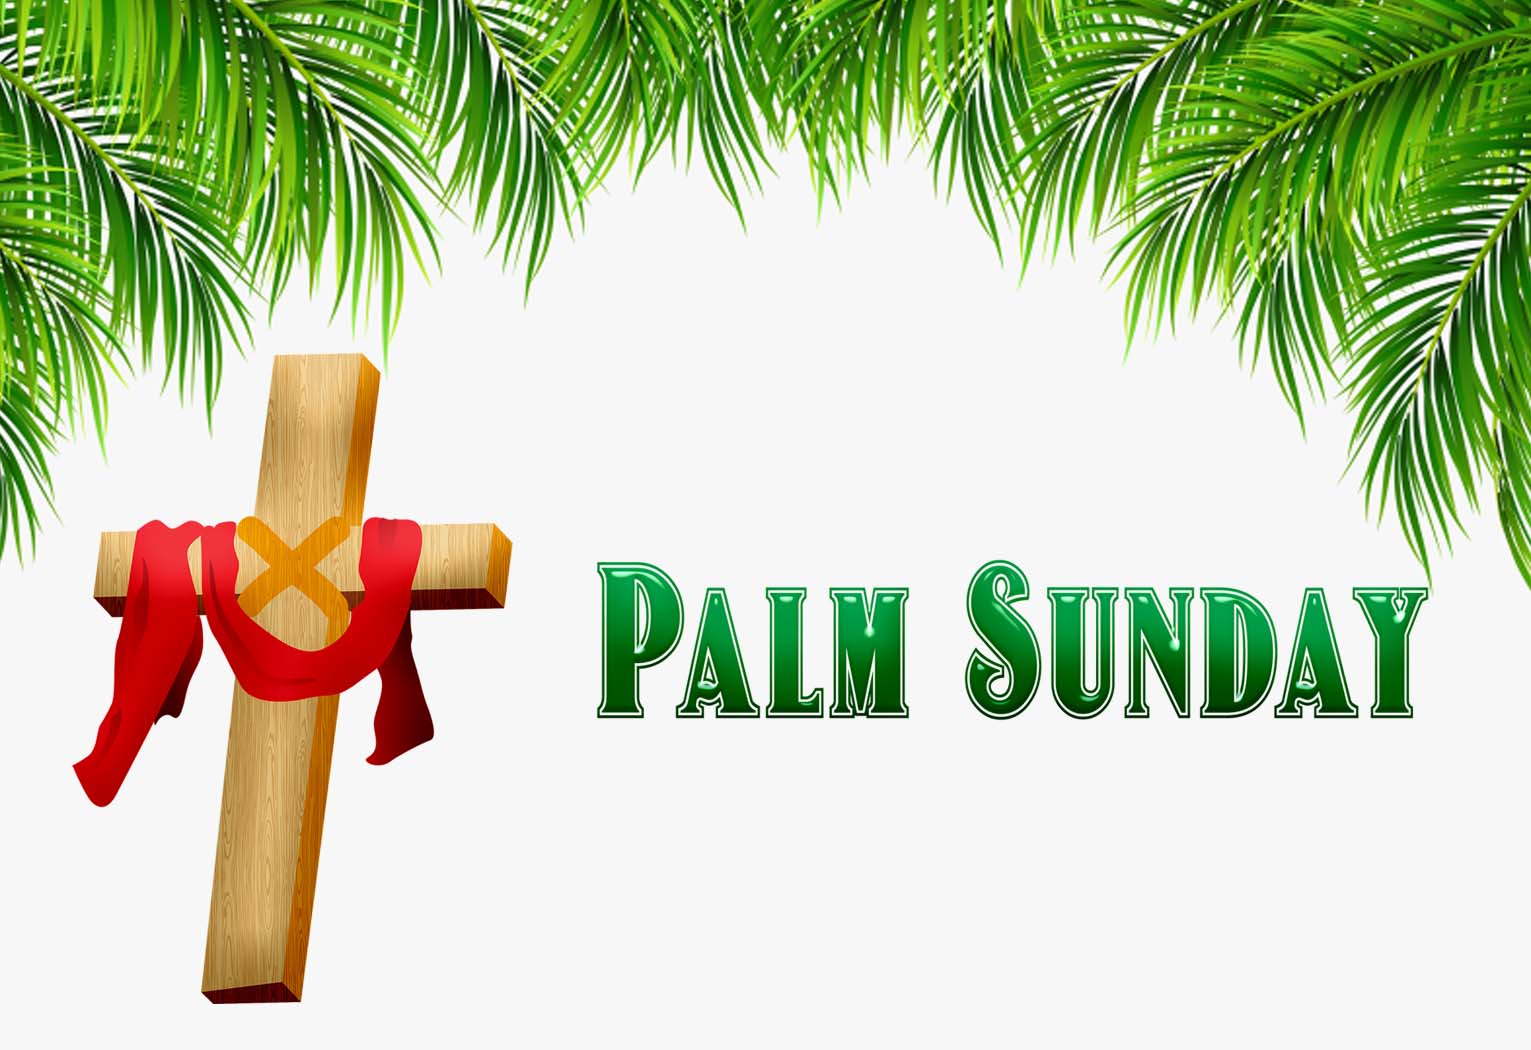 Happy Palm Sunday 2023 Image, Wishes, Quotes, Messages and Greetings